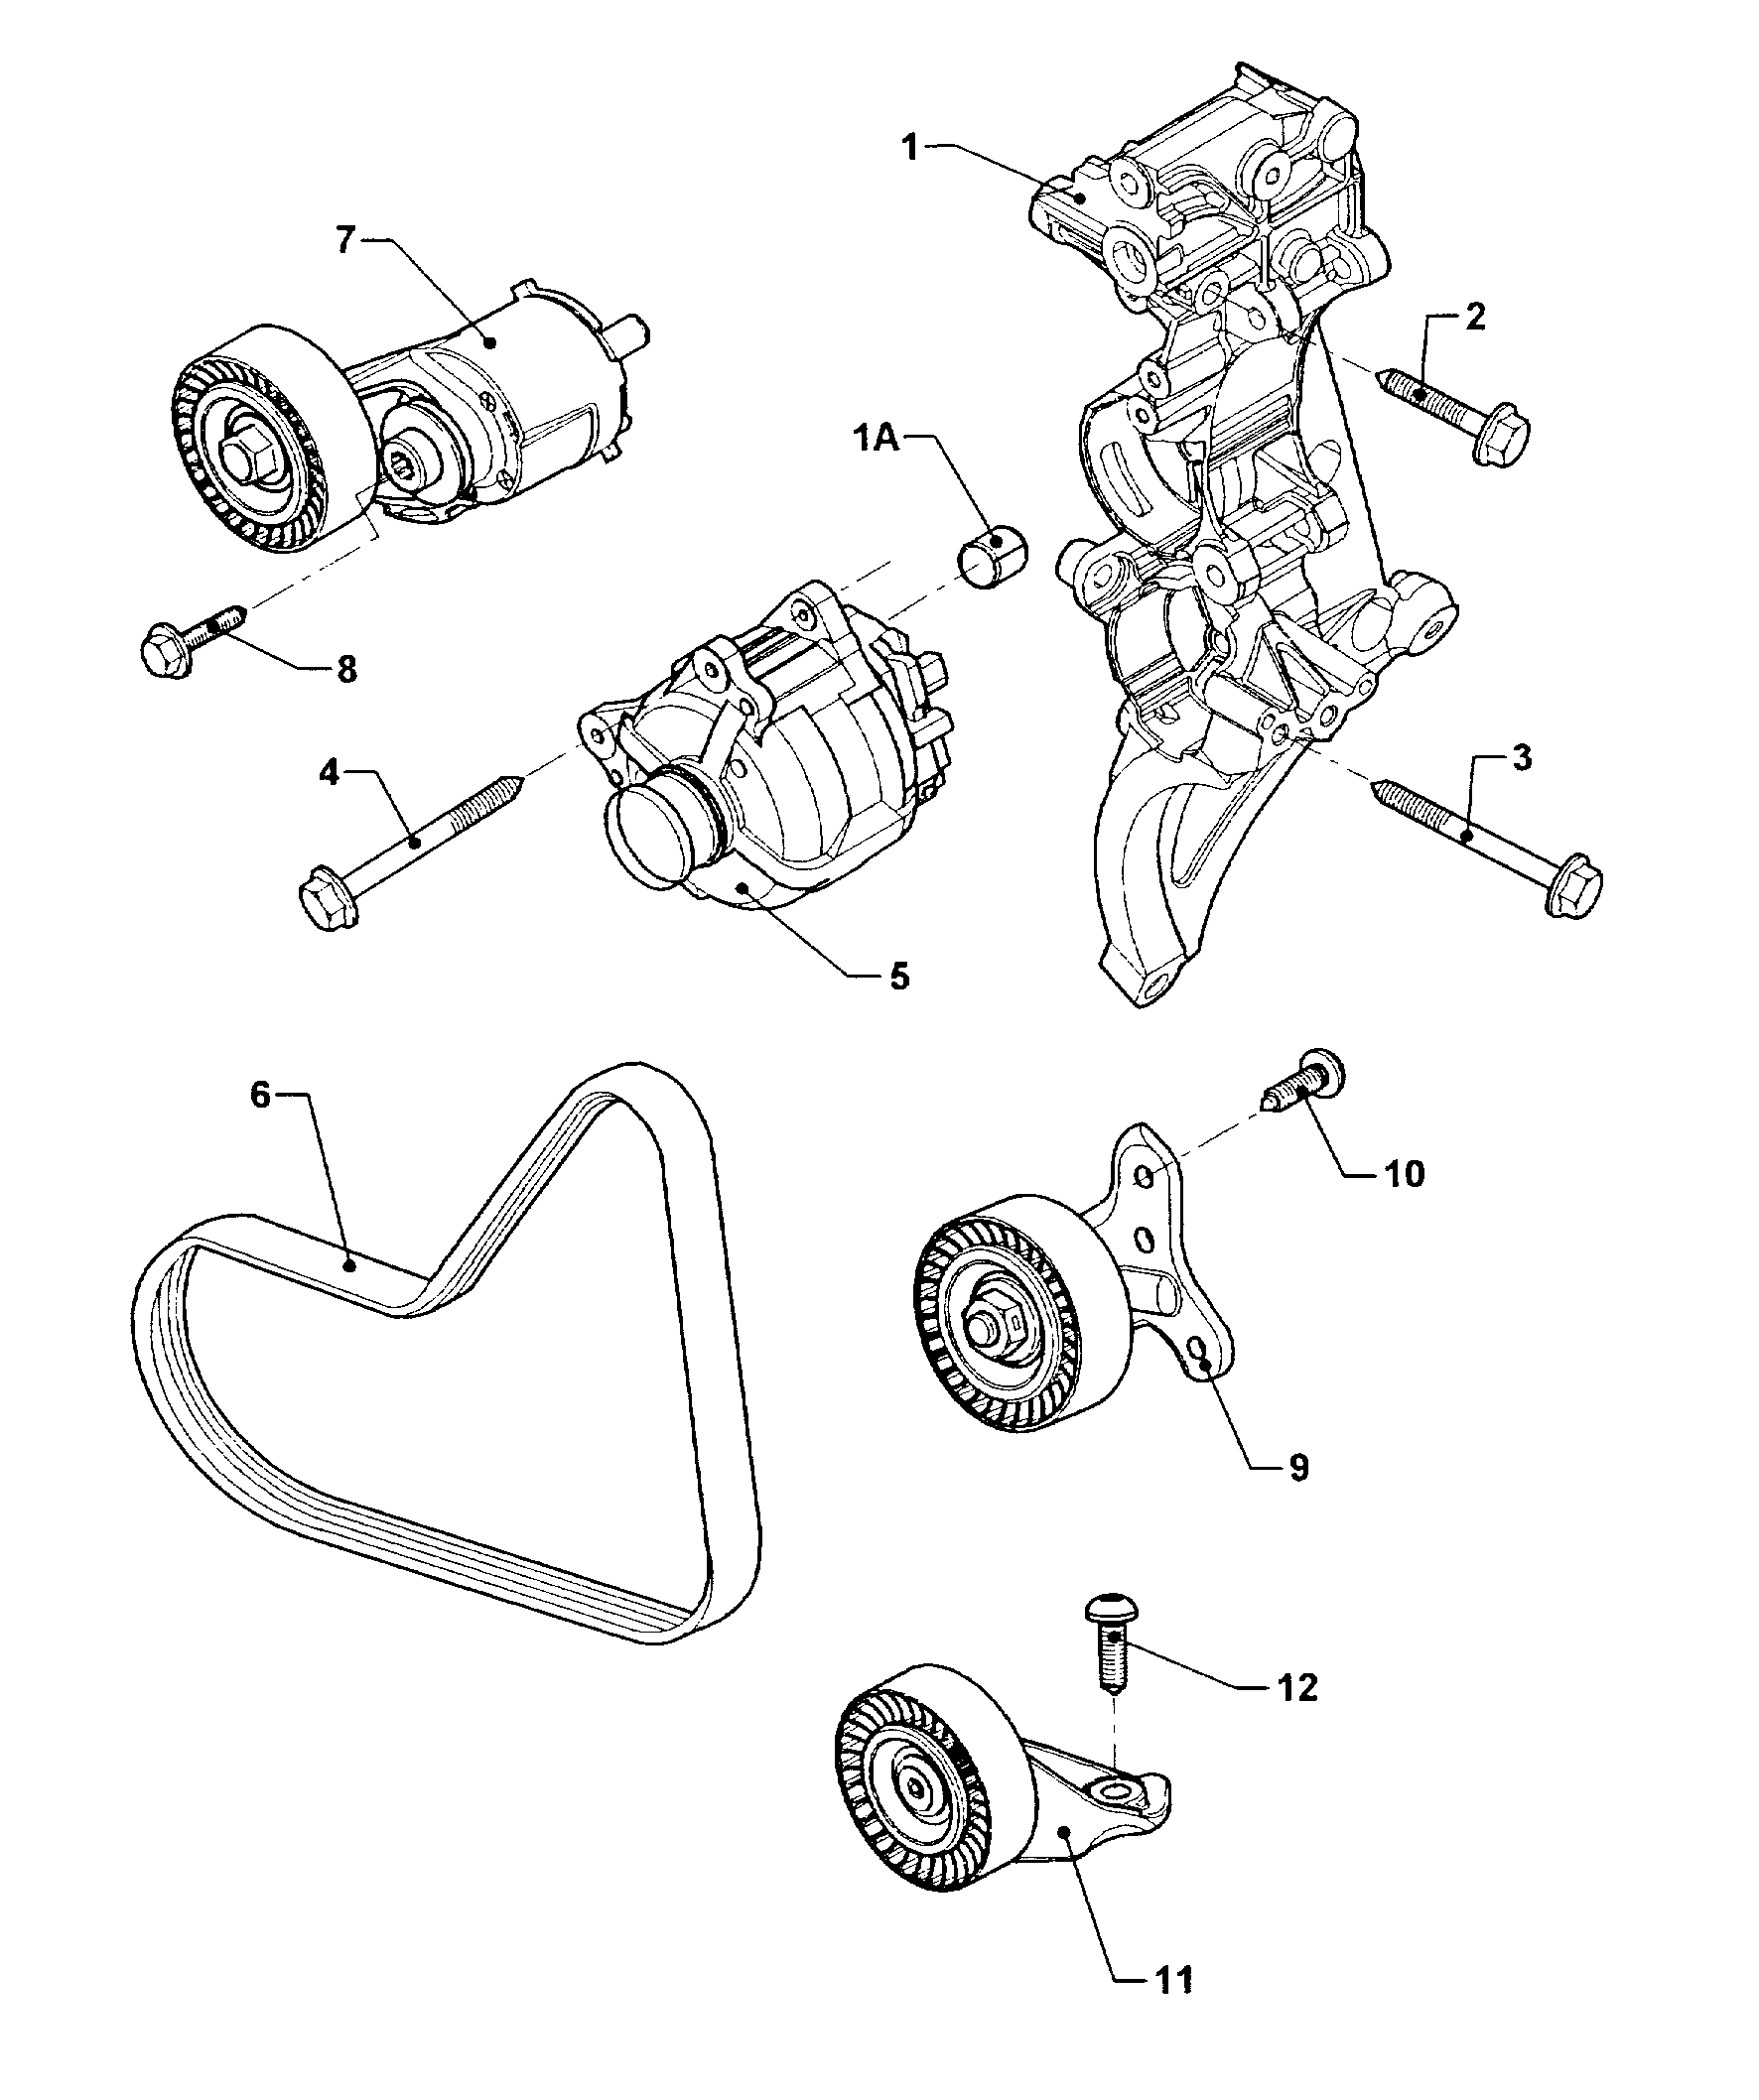 connecting and mounting parts<br>for alternatorPoly-V-belt 2.5Ltr. - Beetle - be